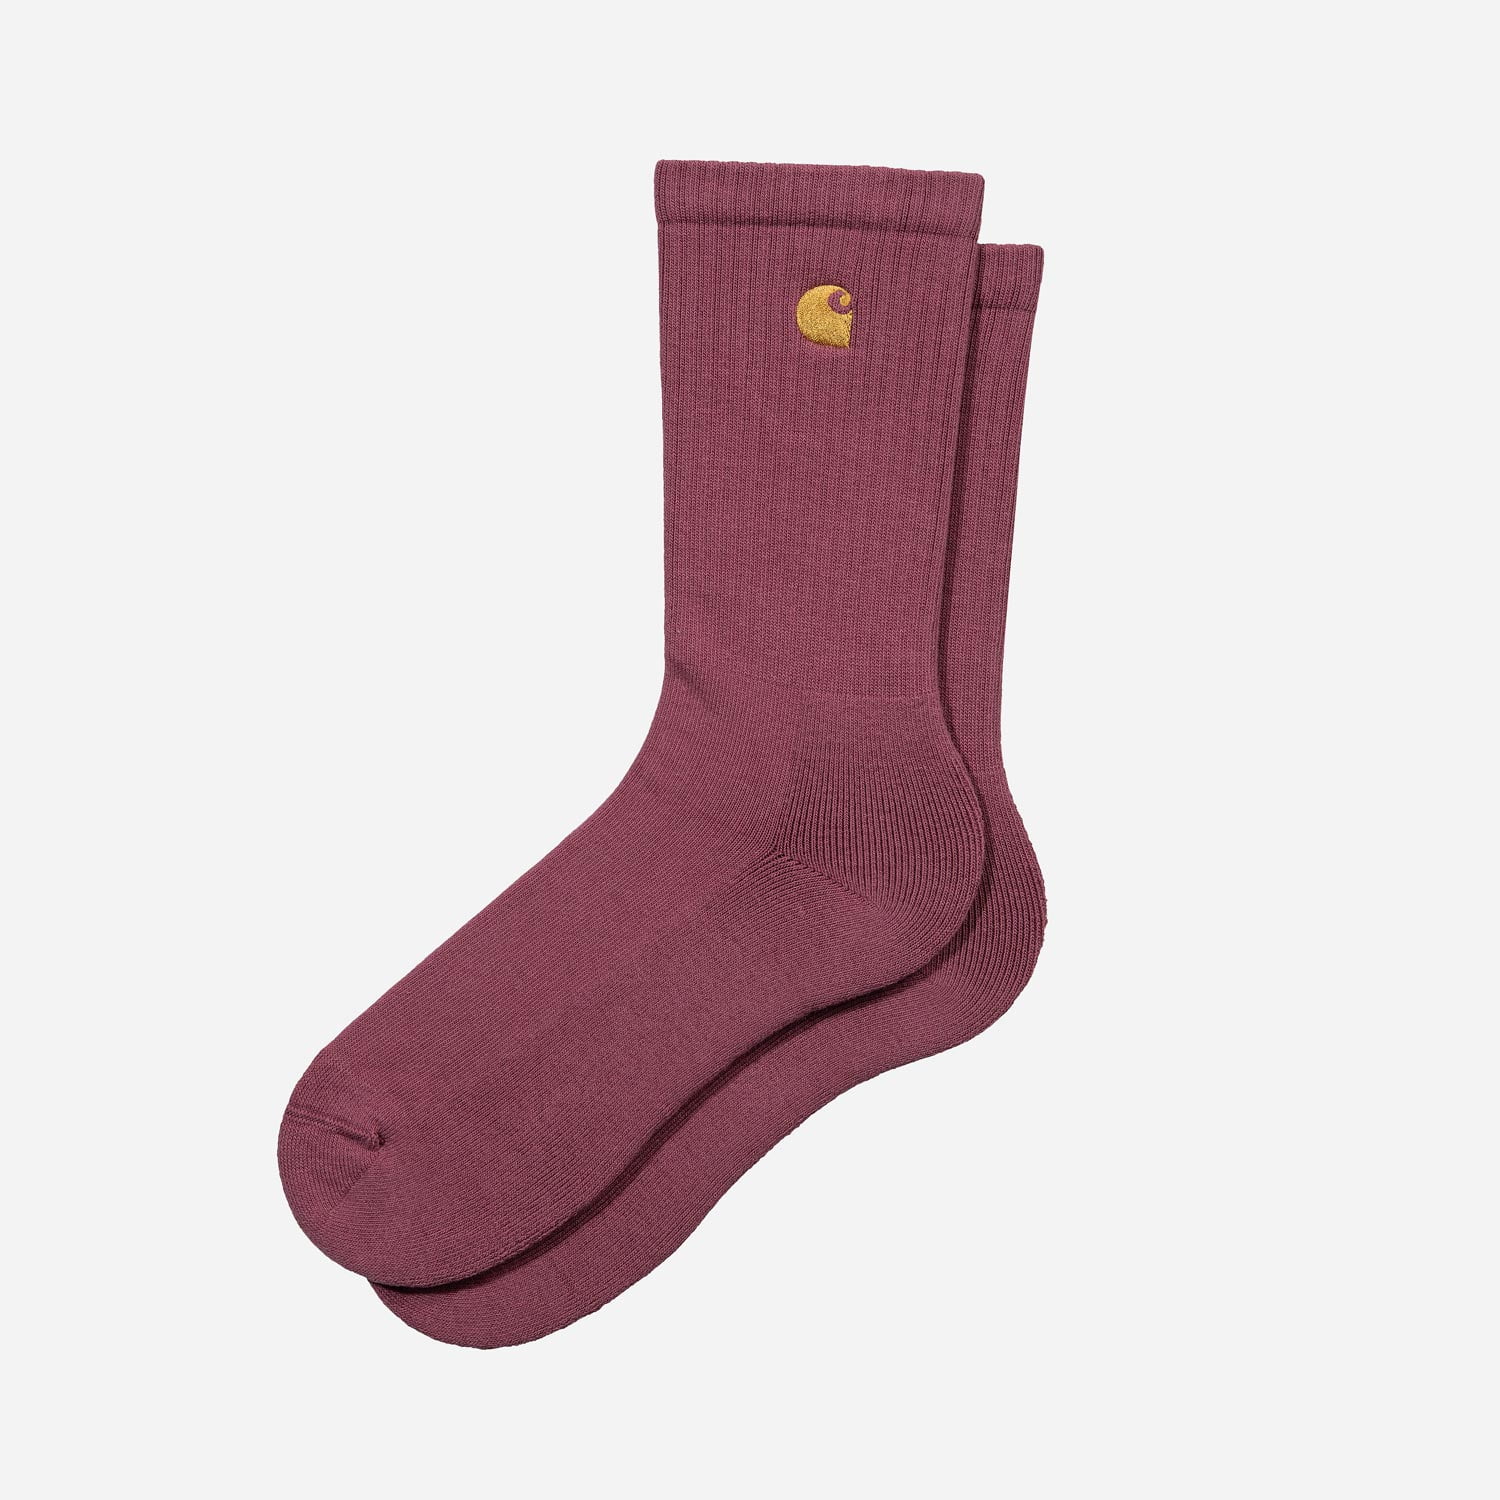 Carhartt WIP Chase Sock - Punch/Gold